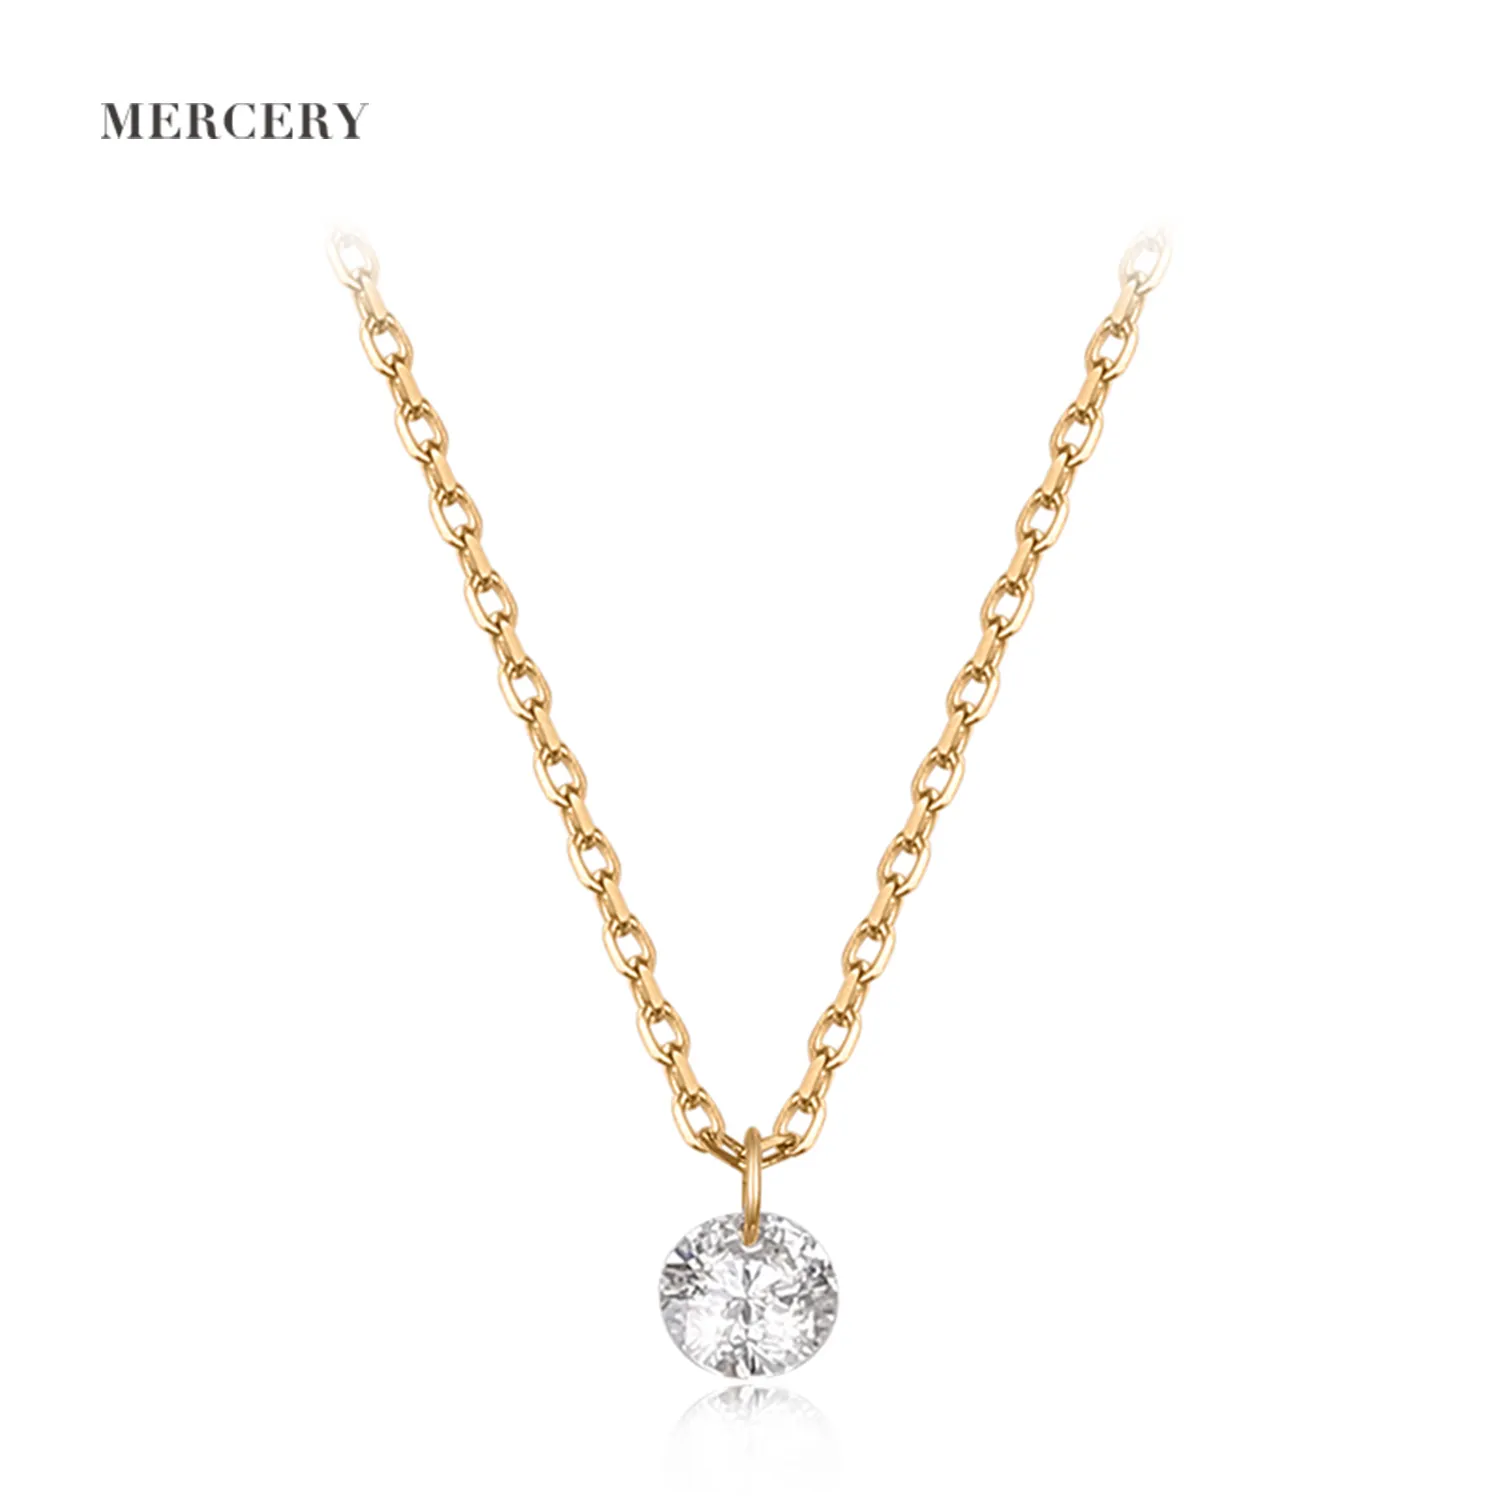 Mercery Latest New Products Custom Charm Necklace Diamond Jewelry Luxury 14K Solid Gold Pendant Necklace For Women